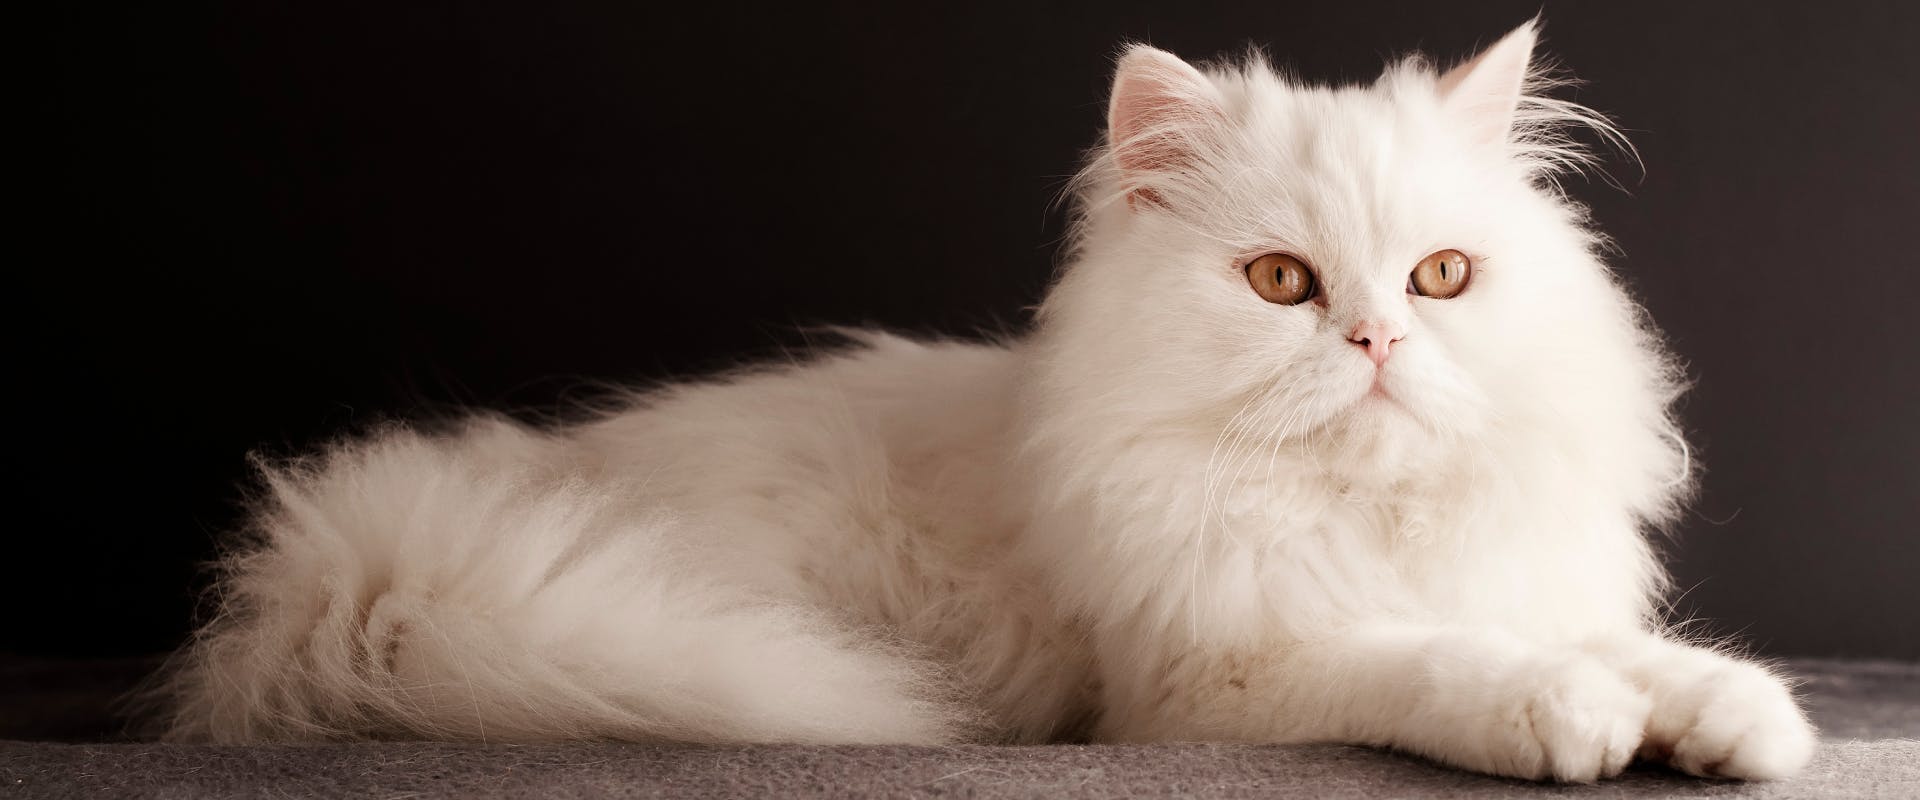 white long haired cat with amber eyes